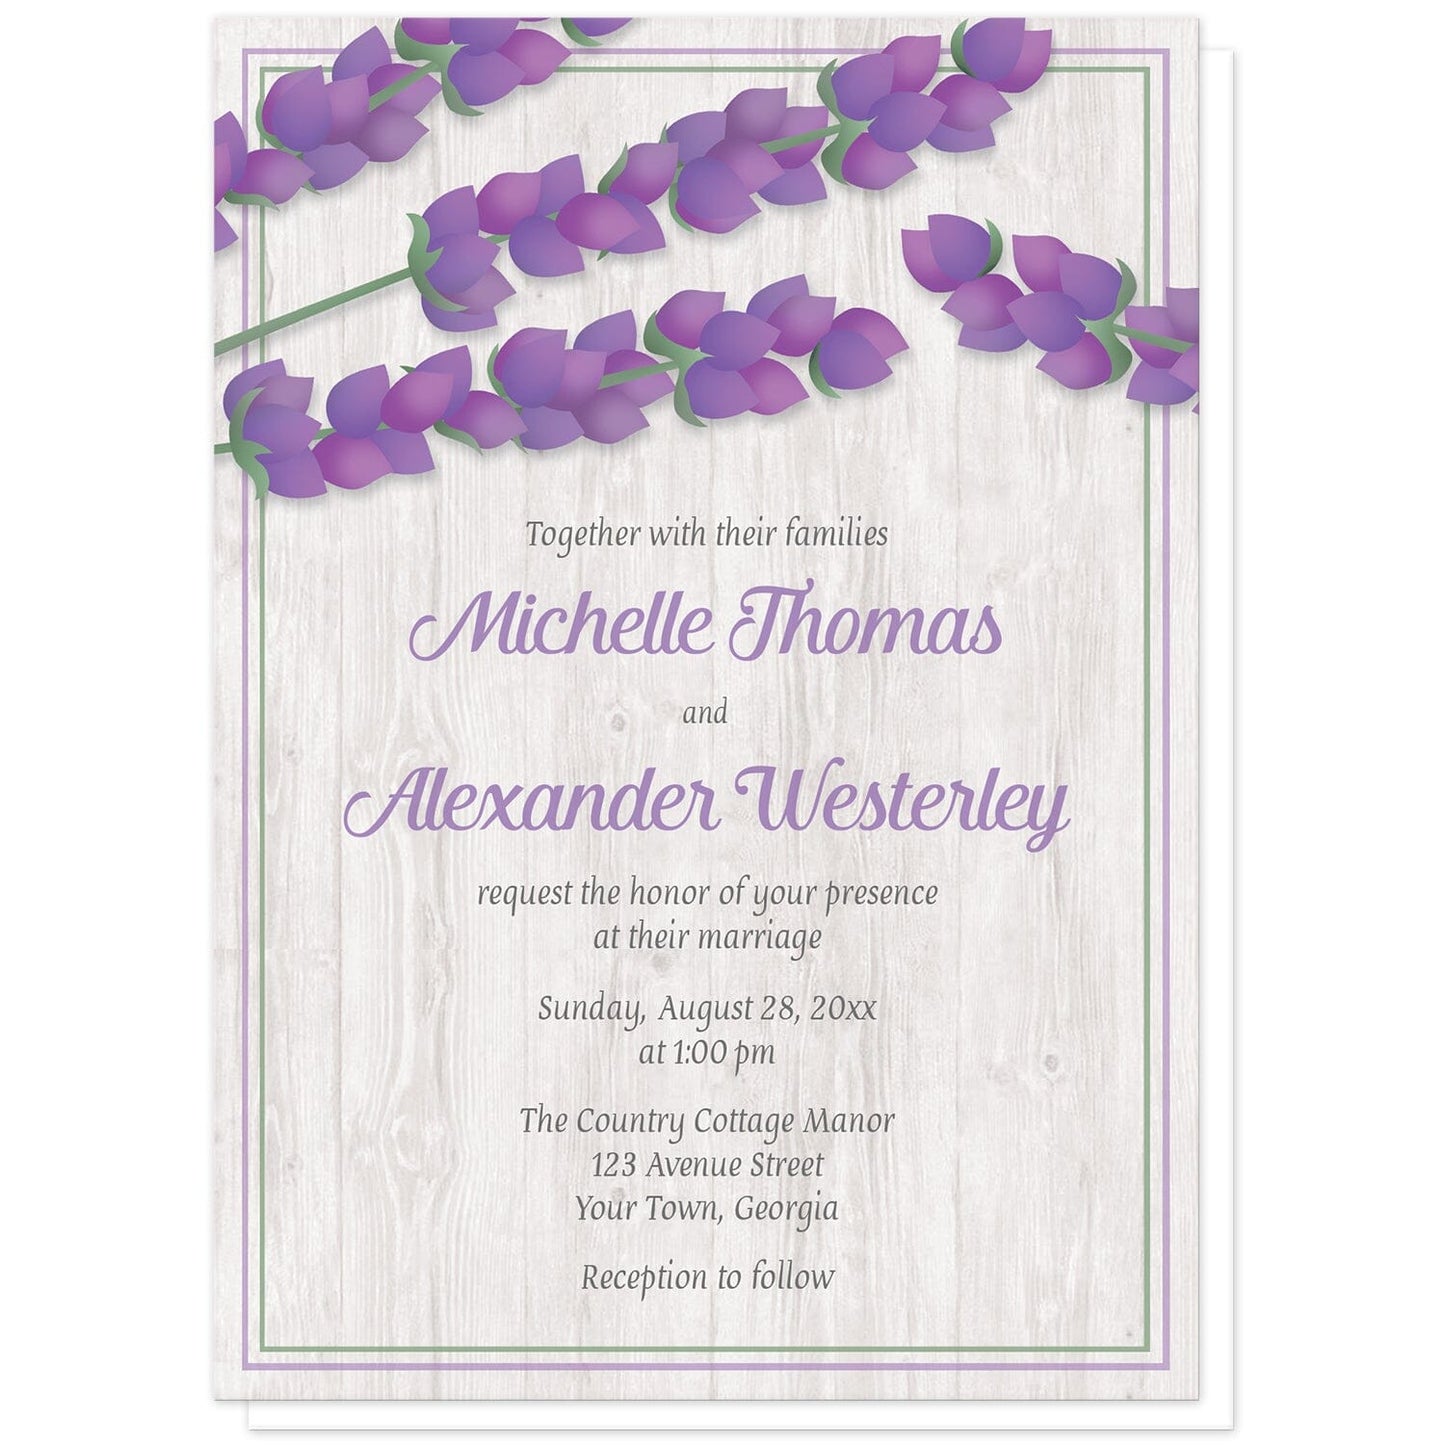 Whitewashed Wood Lavender Wedding Invitations at Artistically Invited. Pretty whitewashed wood lavender wedding invitations with a rustic chic design featuring illustrated purple lavender stems along the top over a light whitewashed wood background illustration outlined with purple and green. Your personalized marriage celebration details are custom printed in purple and gray over the whitewashed wood.